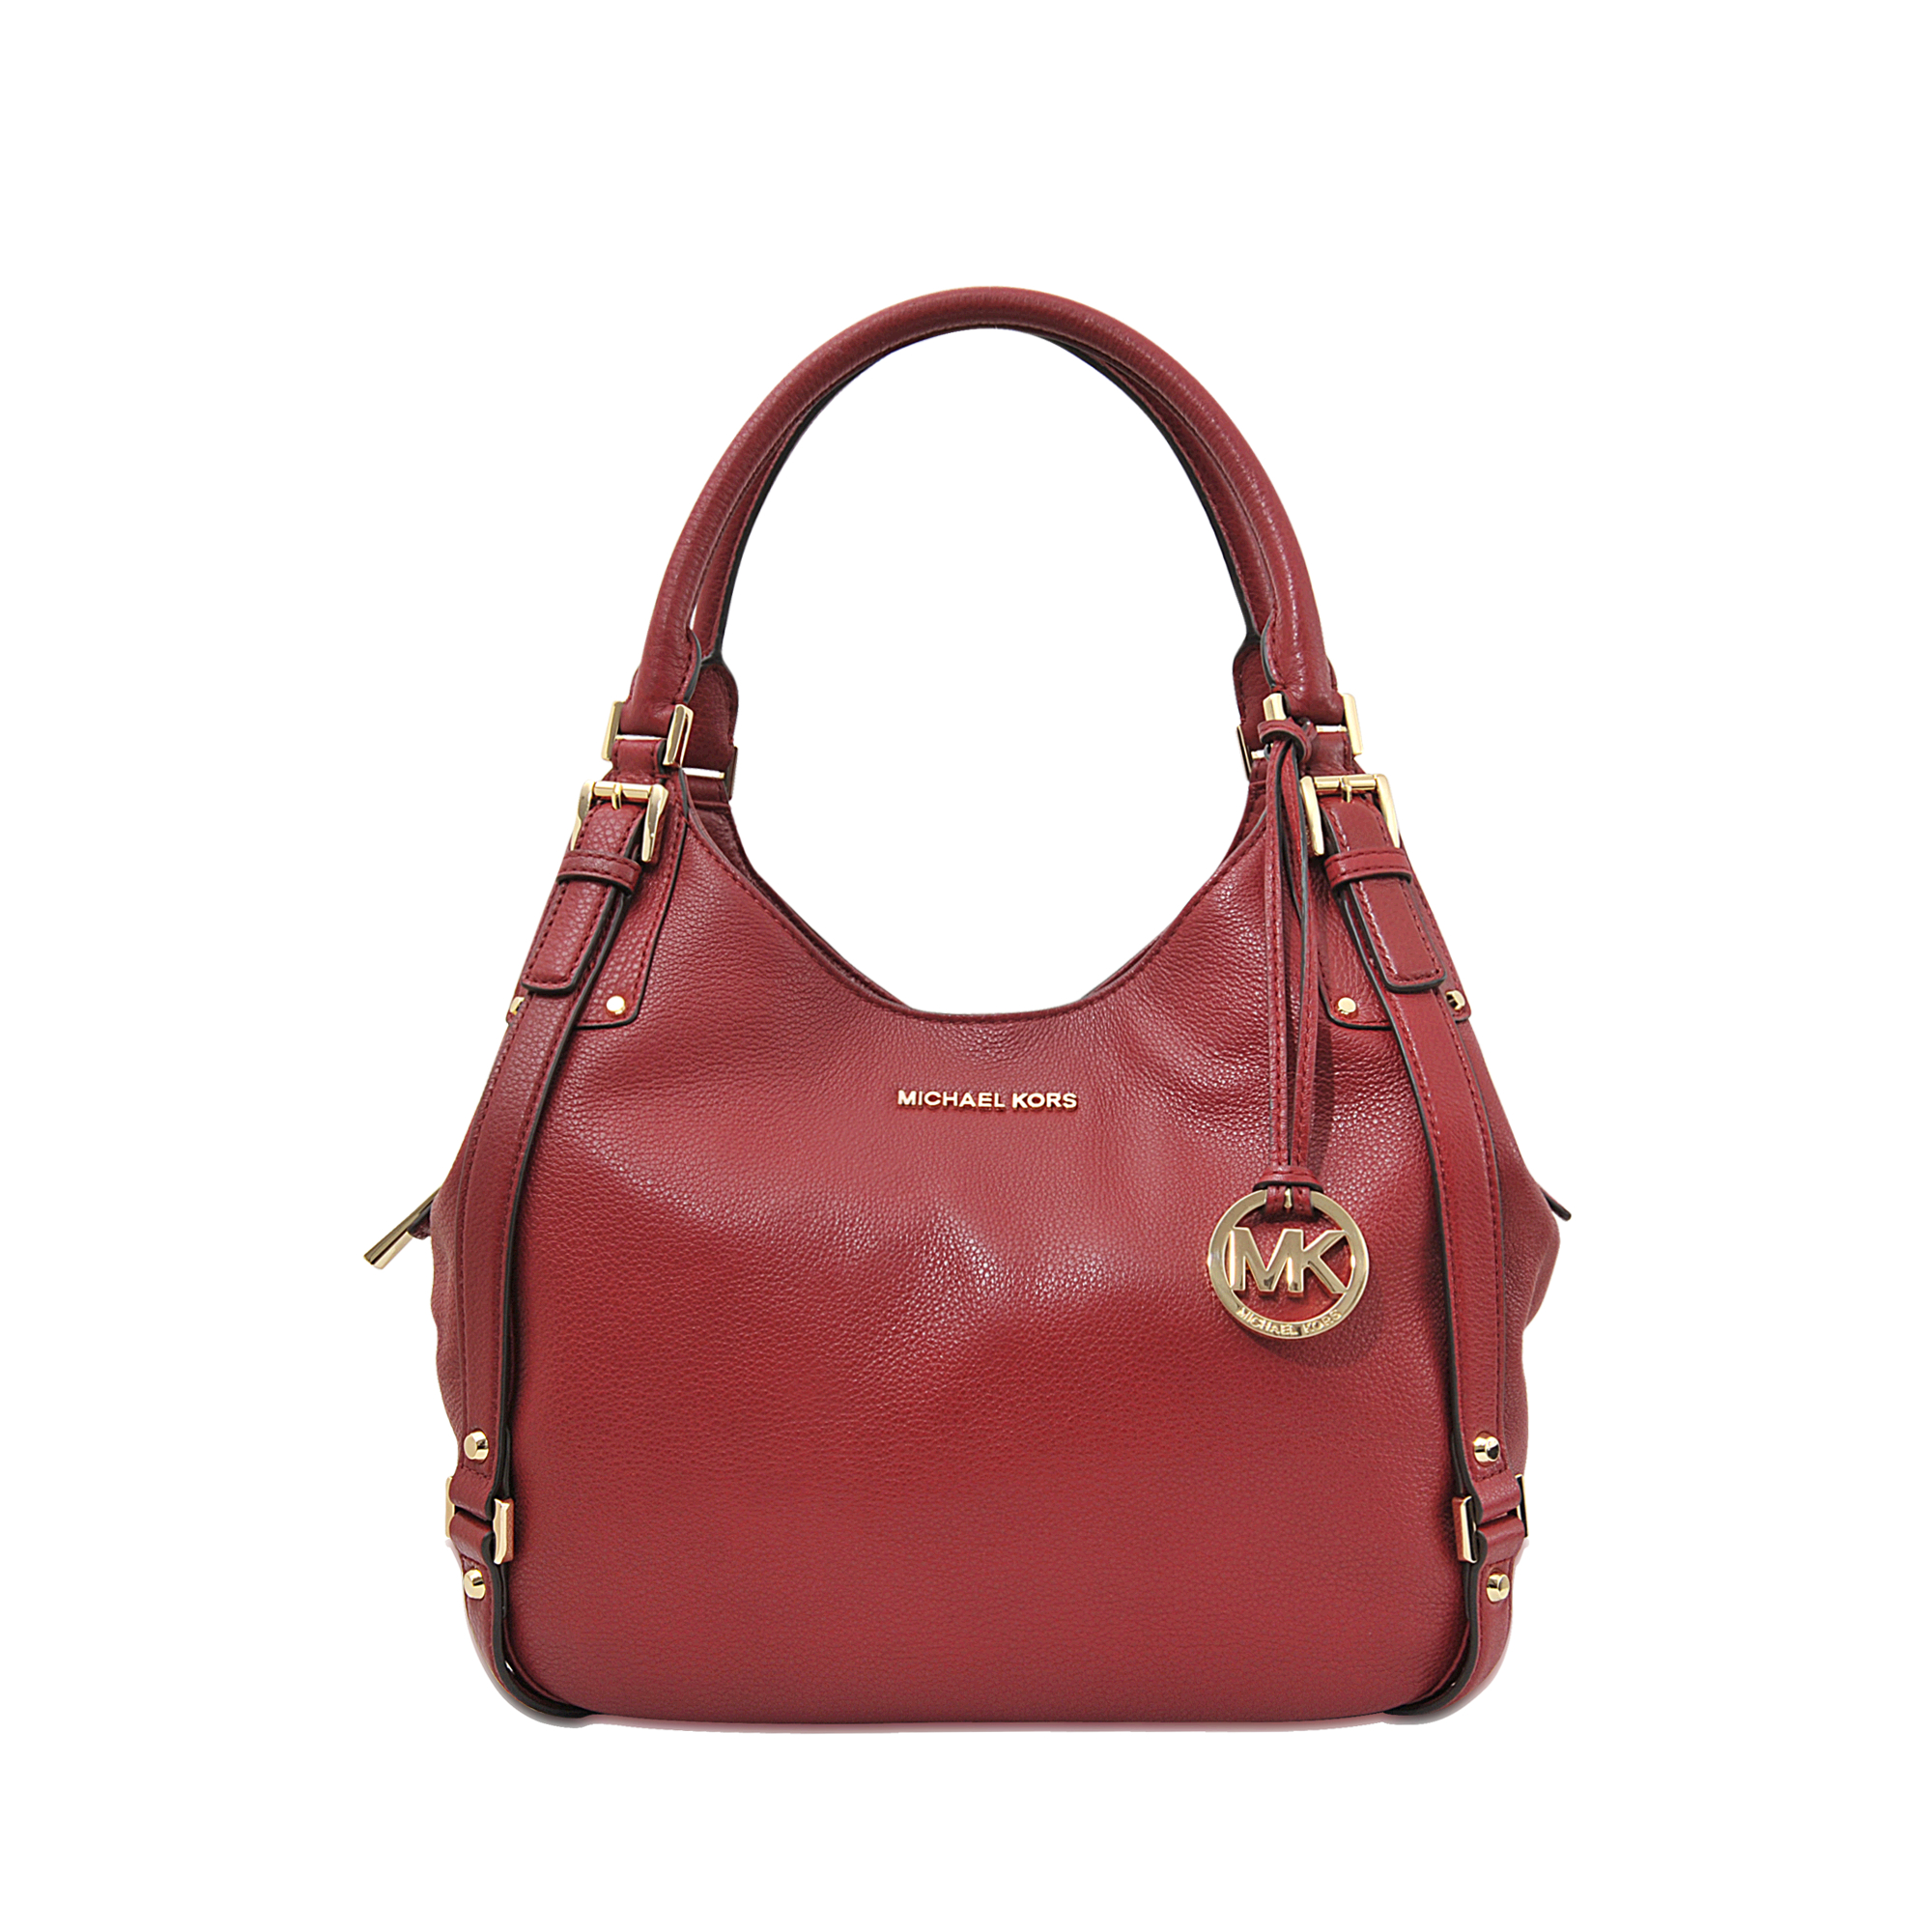 Michael Kors Bedford Tote Bags For Women For Sale | IUCN Water